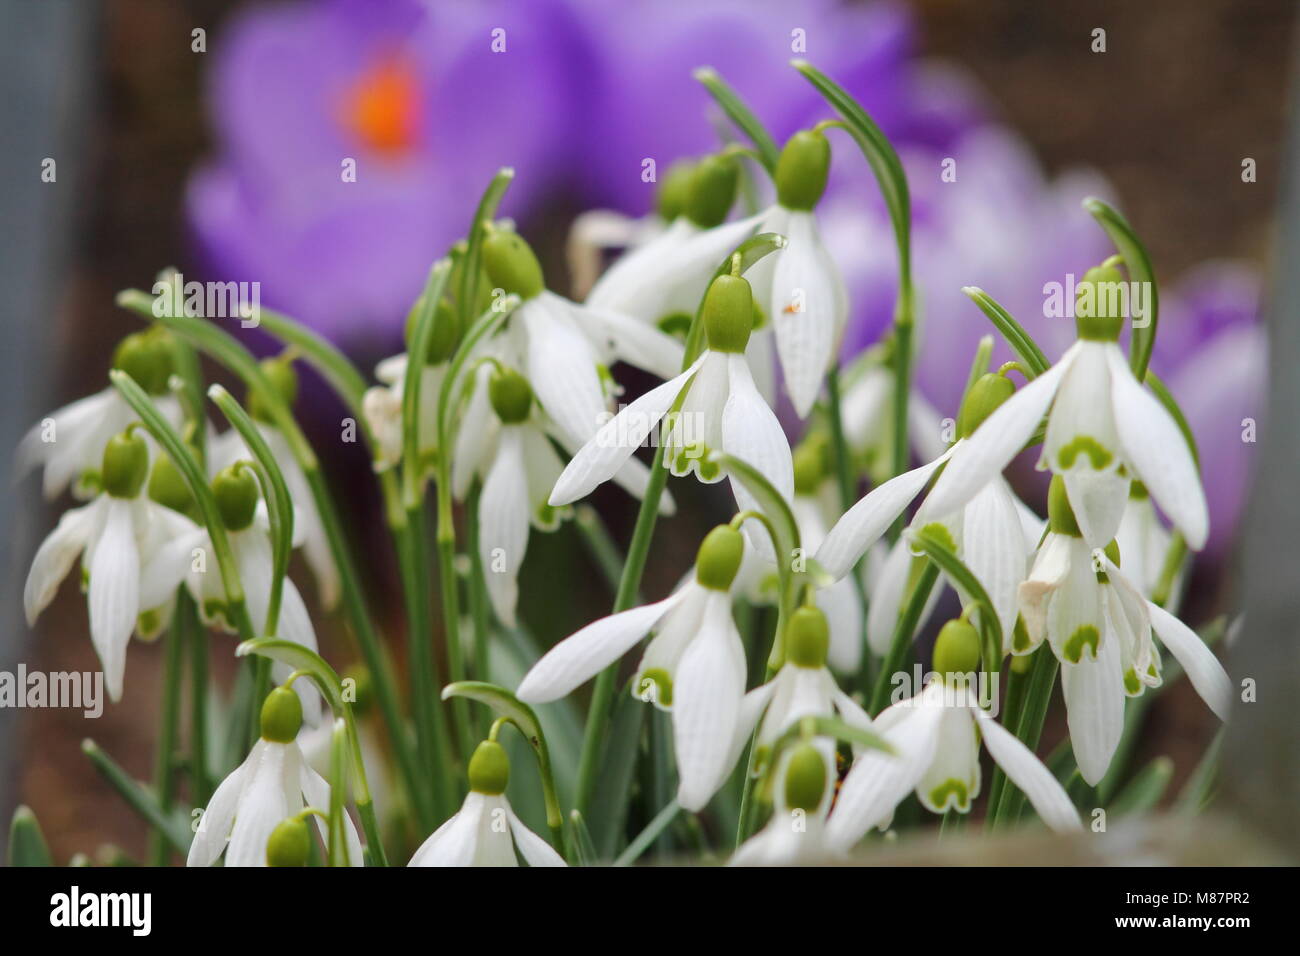 Fragile white snowdrops flowers close up against purple blurred crocuses. Stock Photo